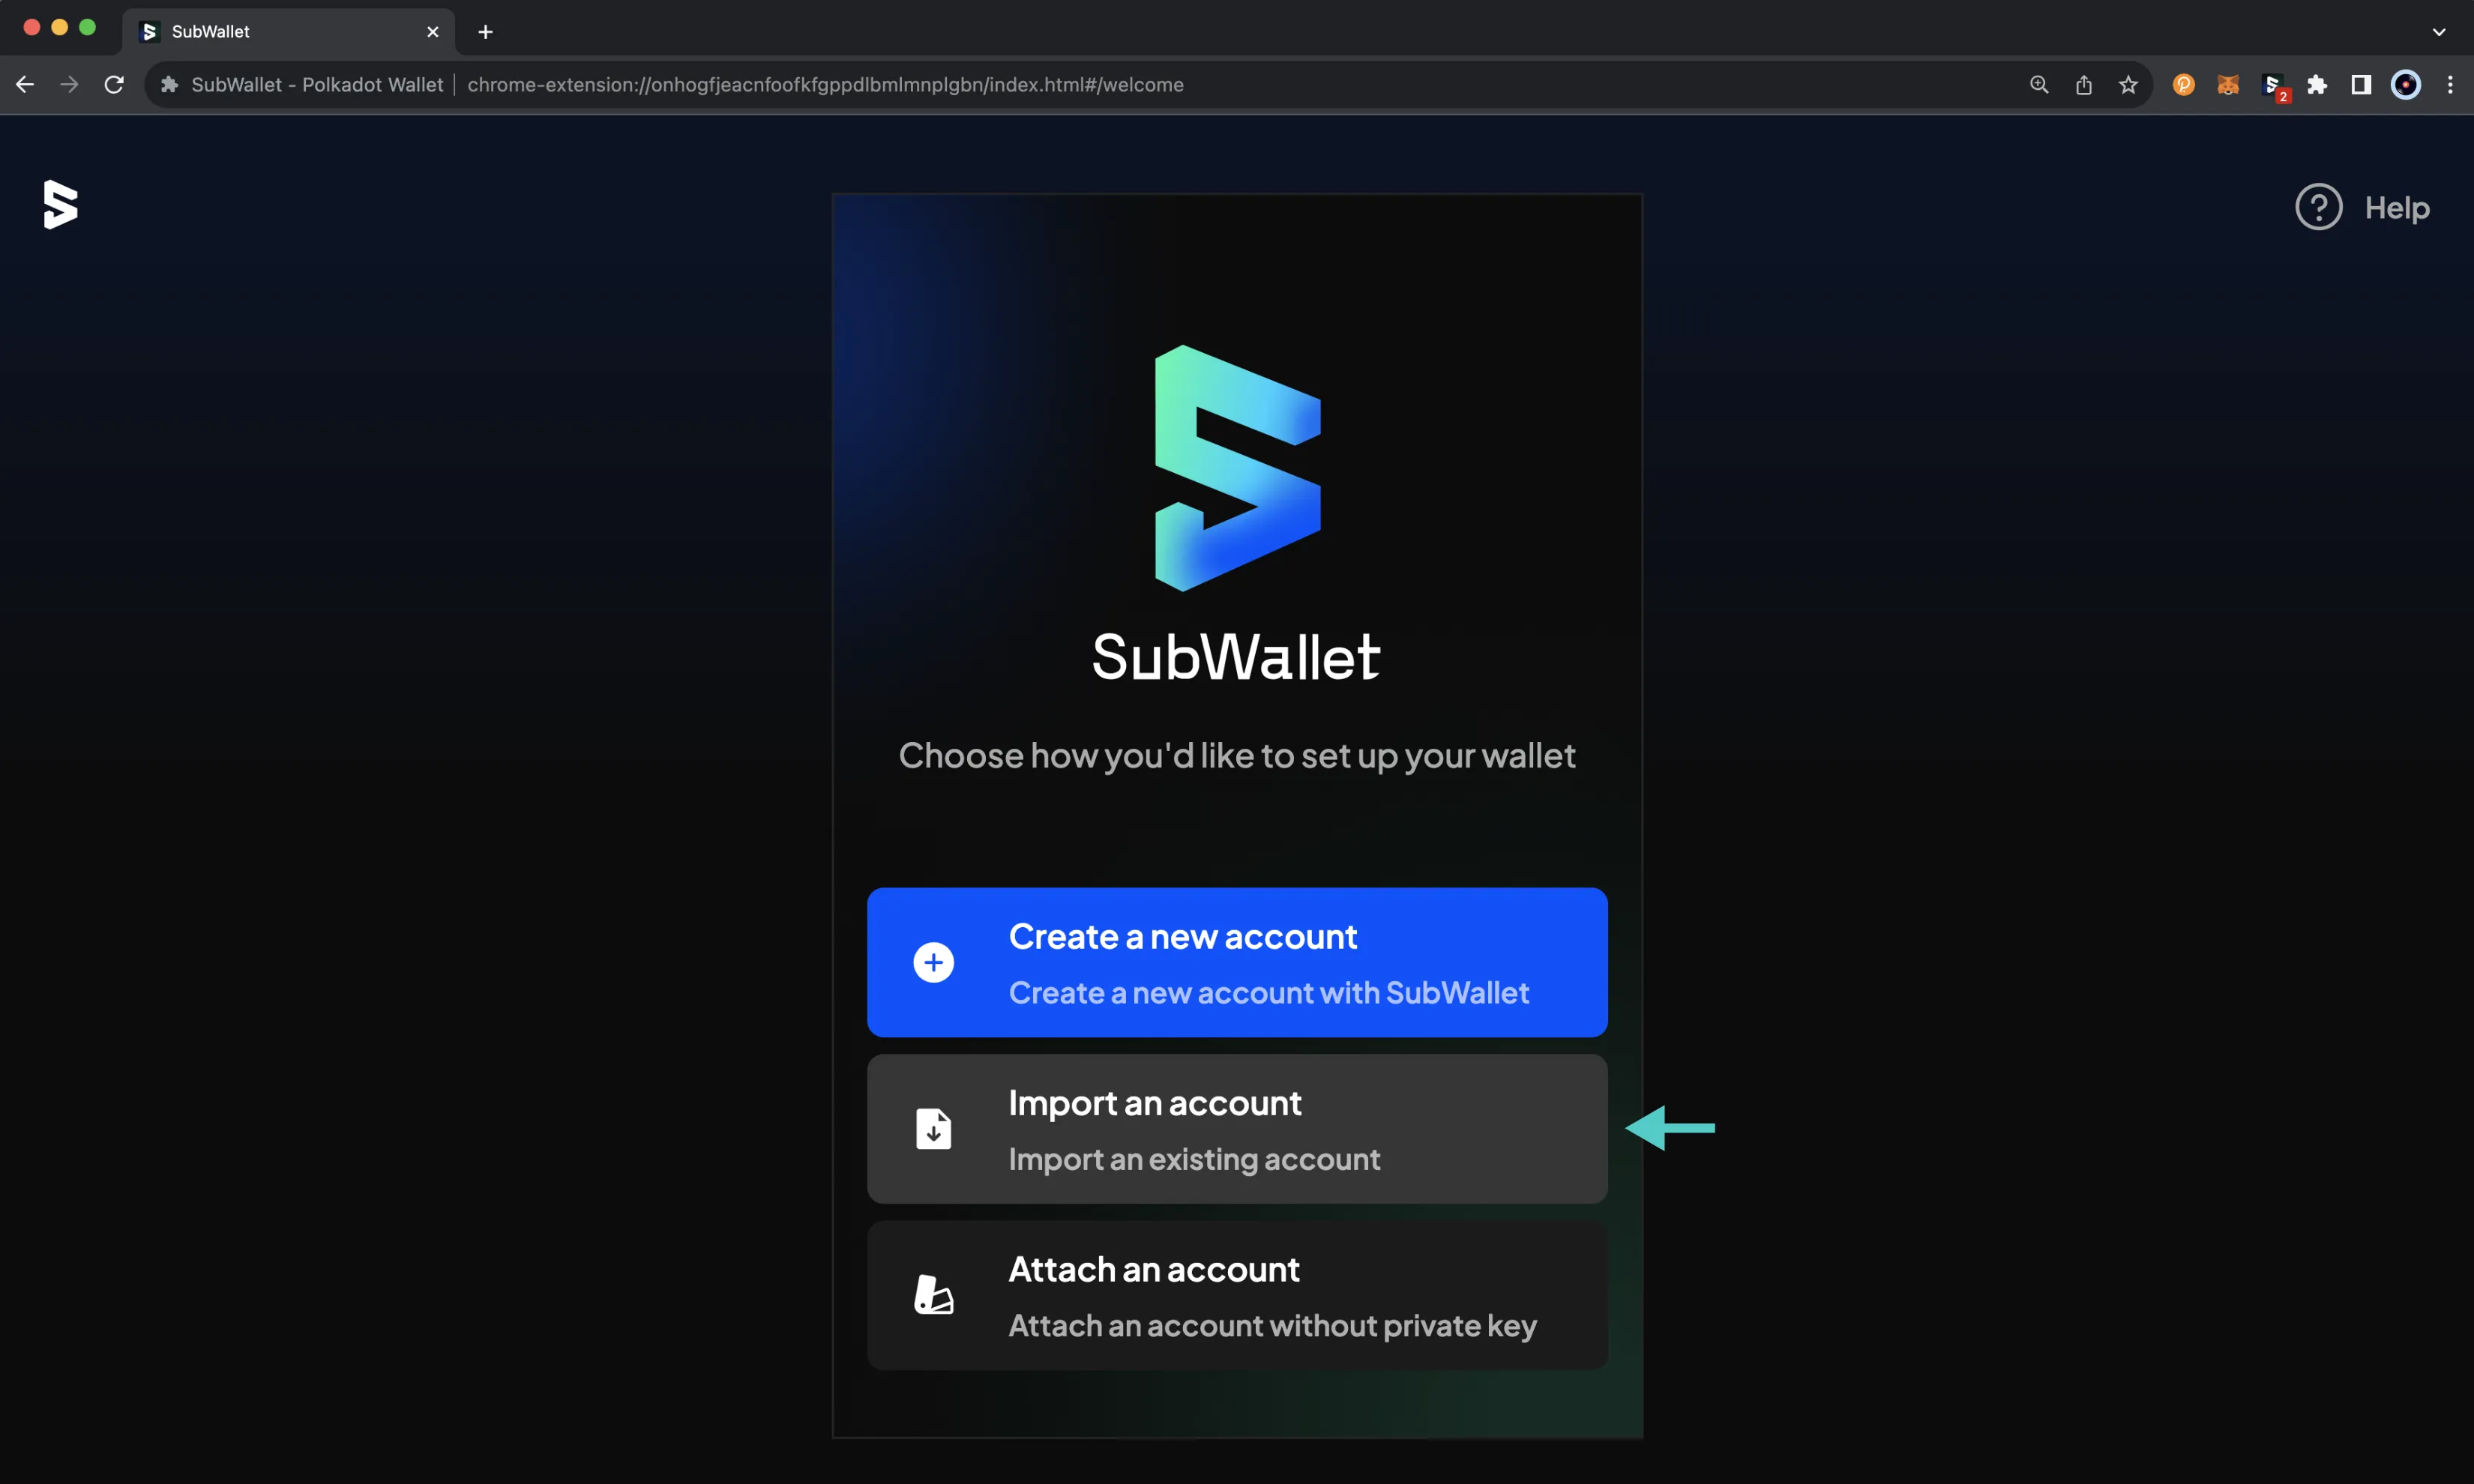 The main screen of the SubWallet browser extension.